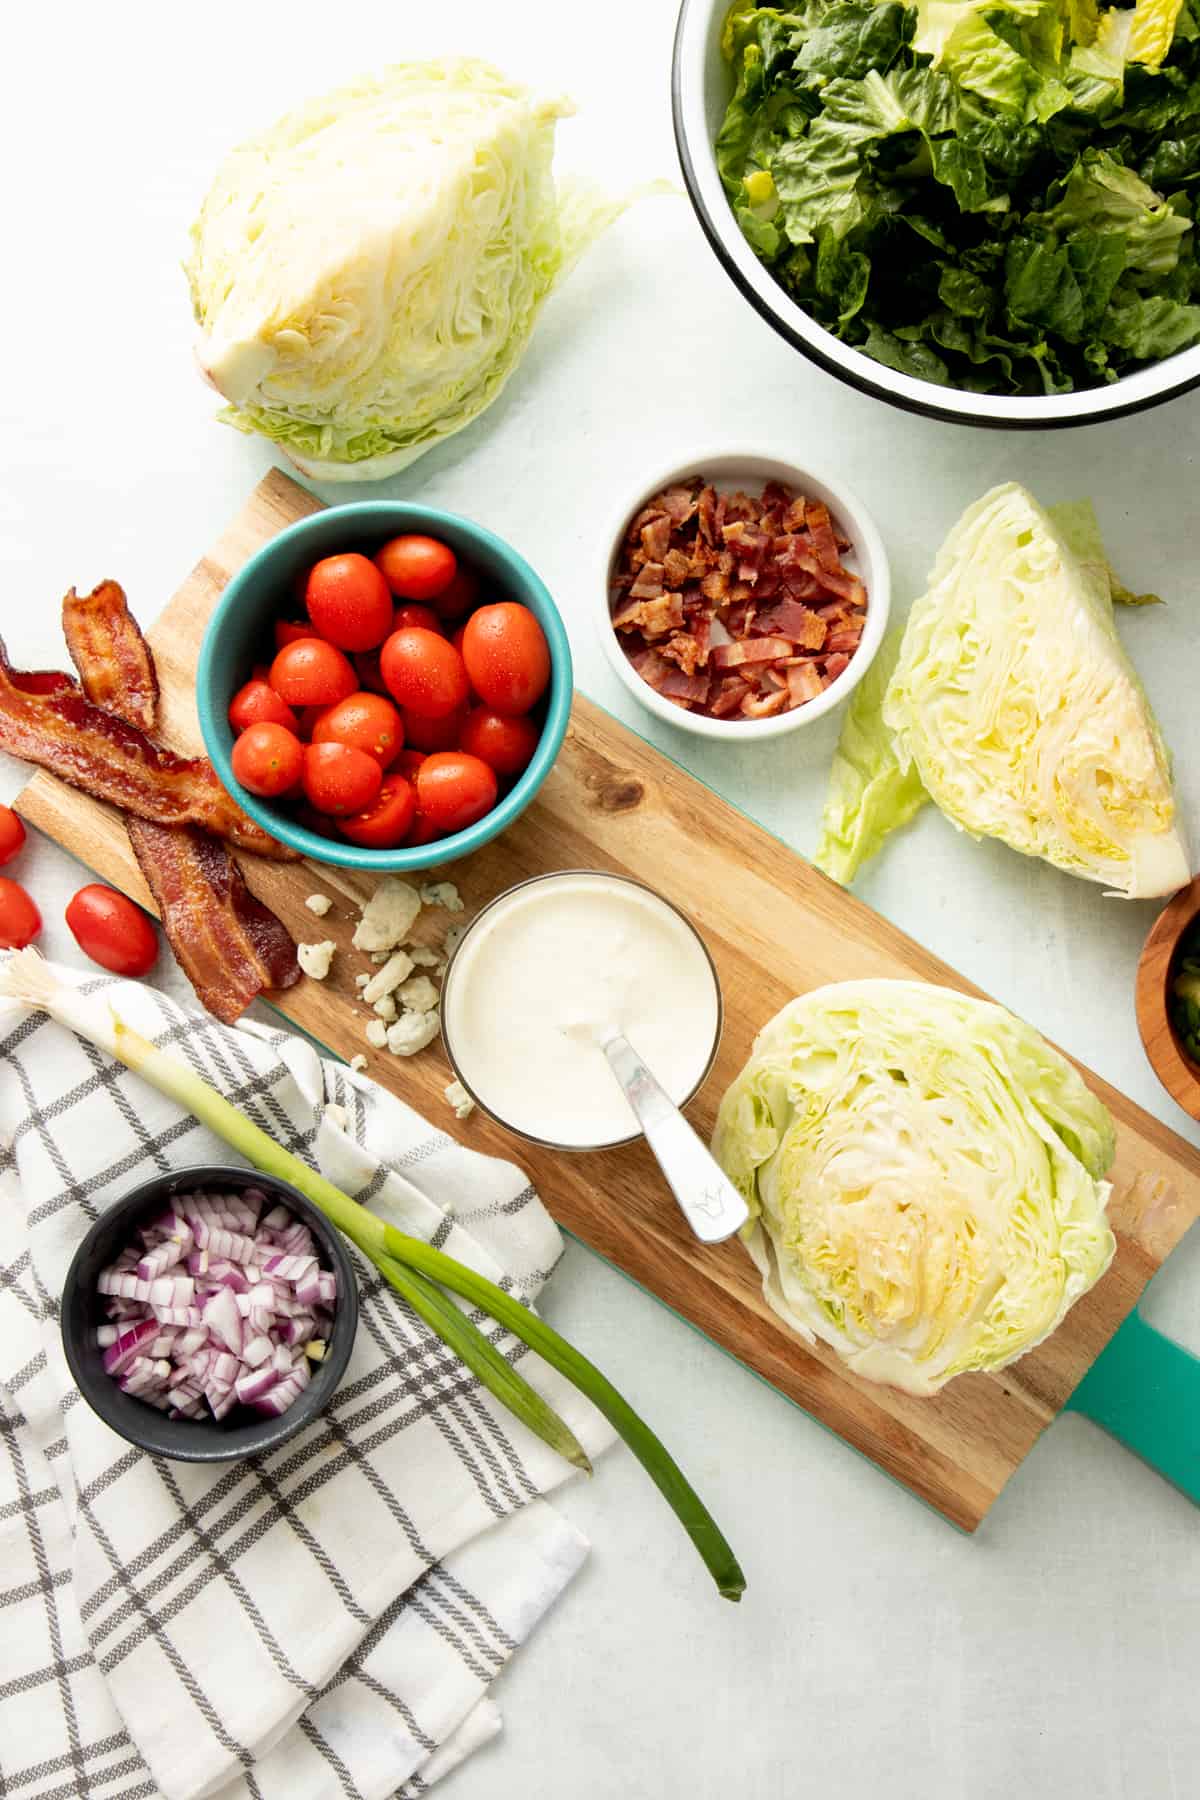 Ingredients for a wedge salad are laid out on a white counter, wooden cutting board, and plaid dish towel.